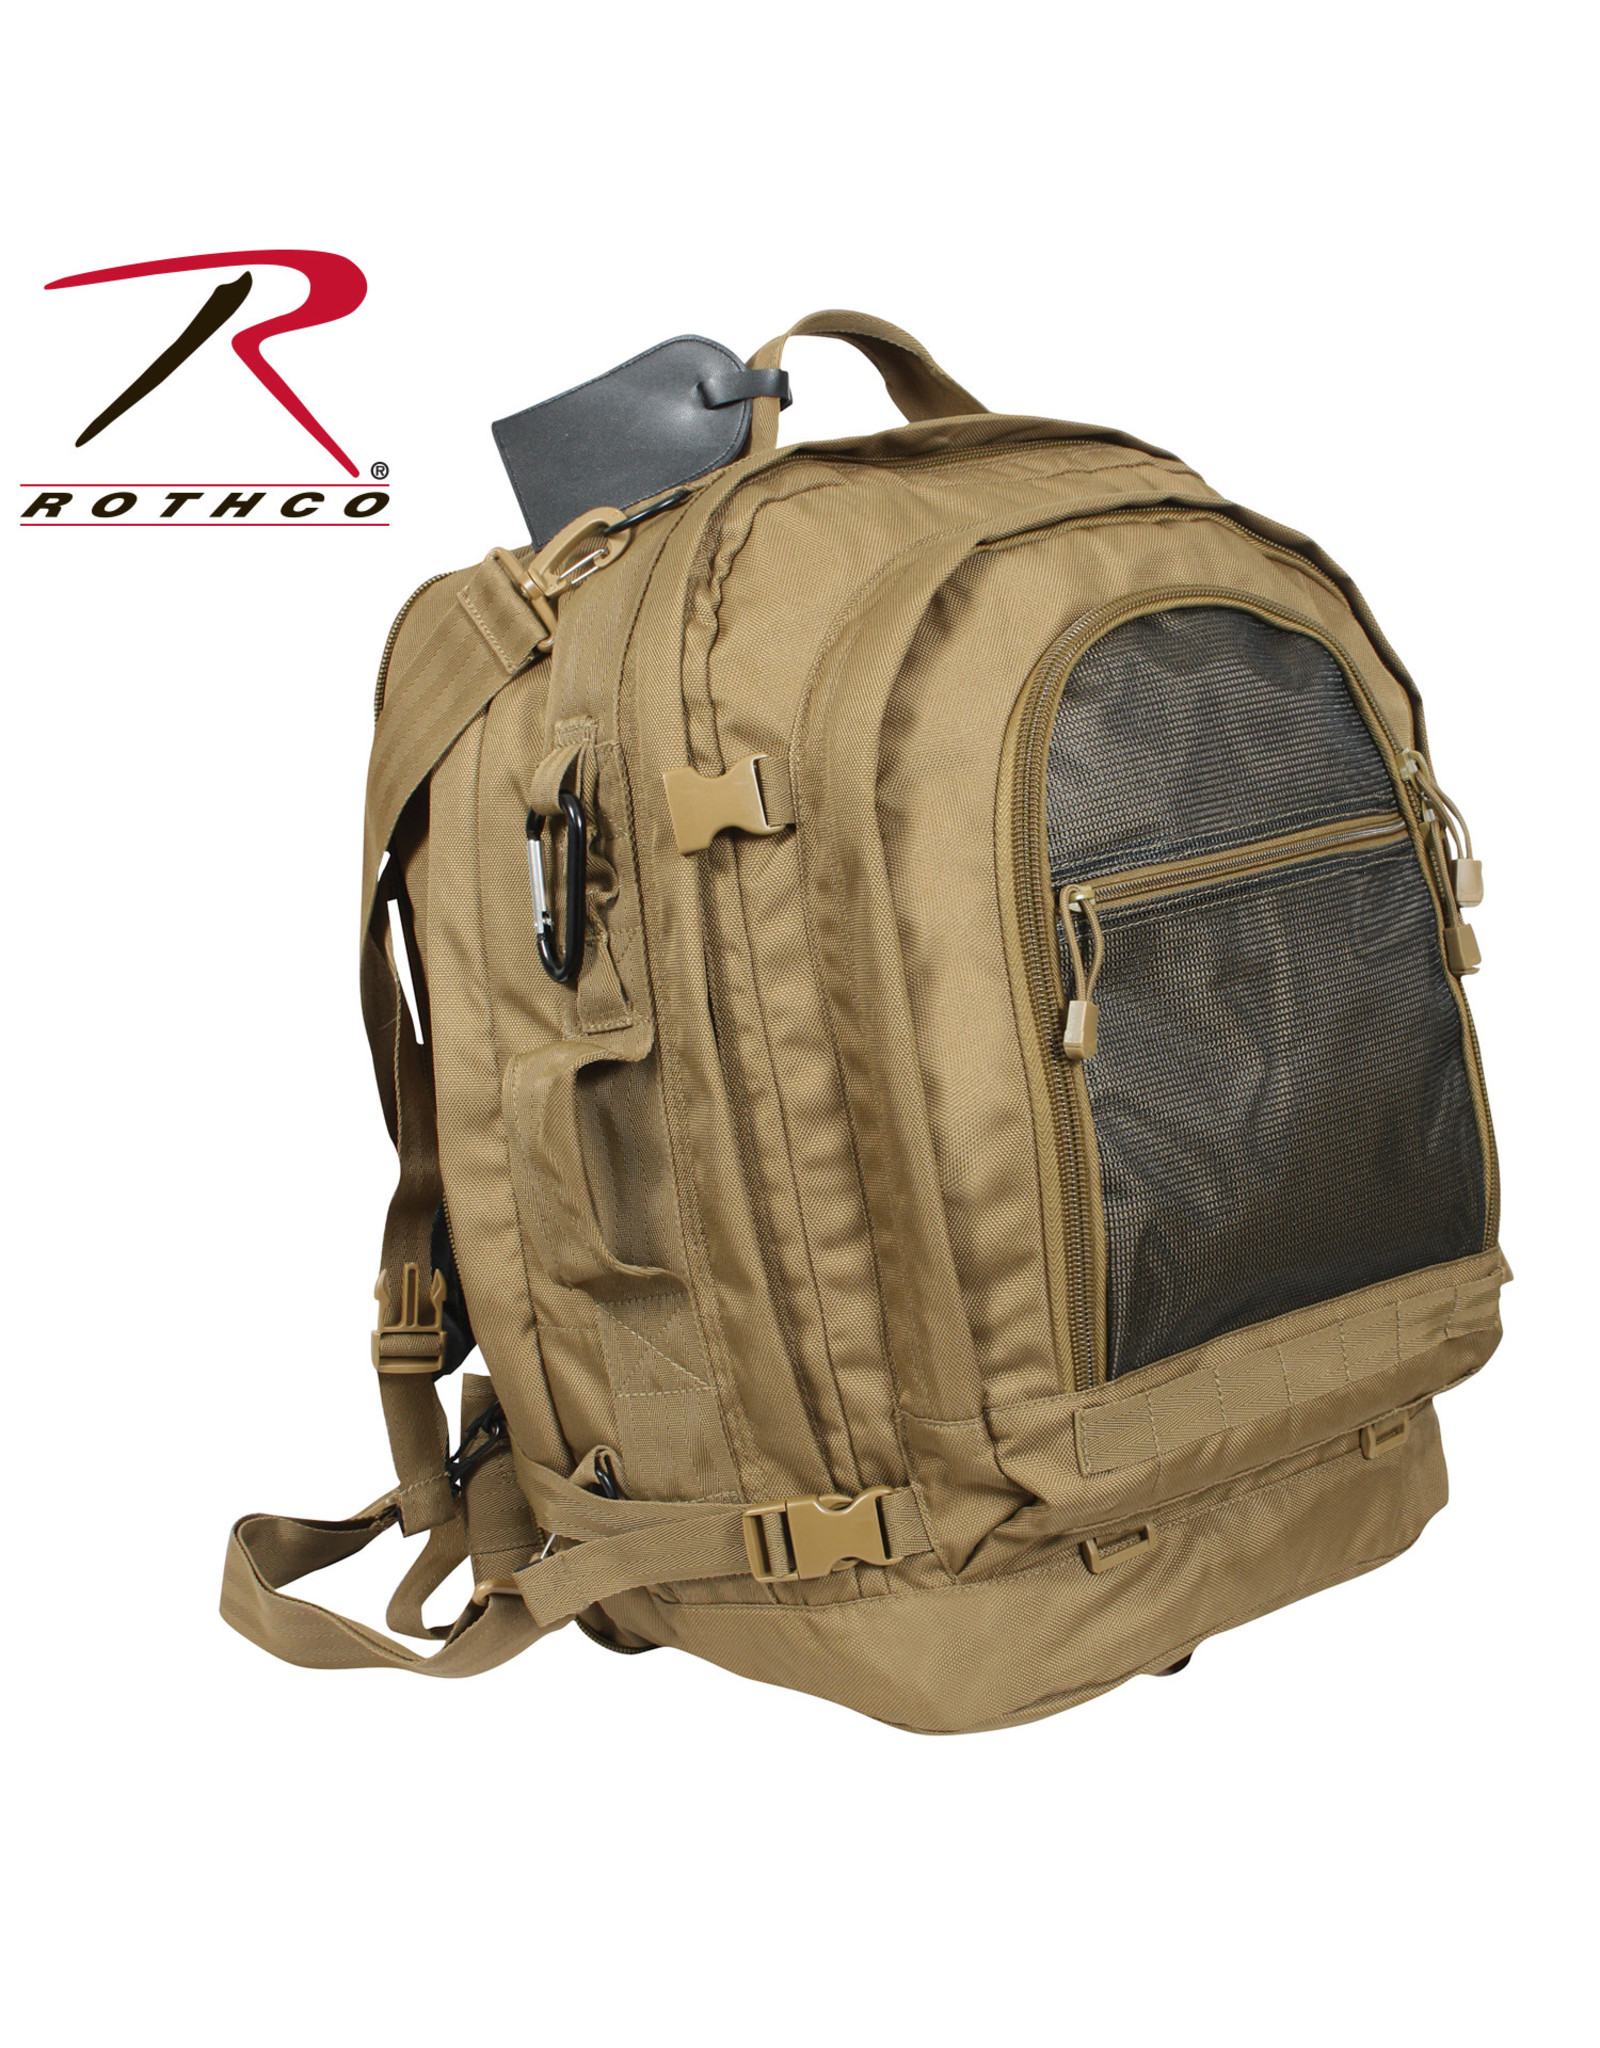 Tactical Backpack - Travel